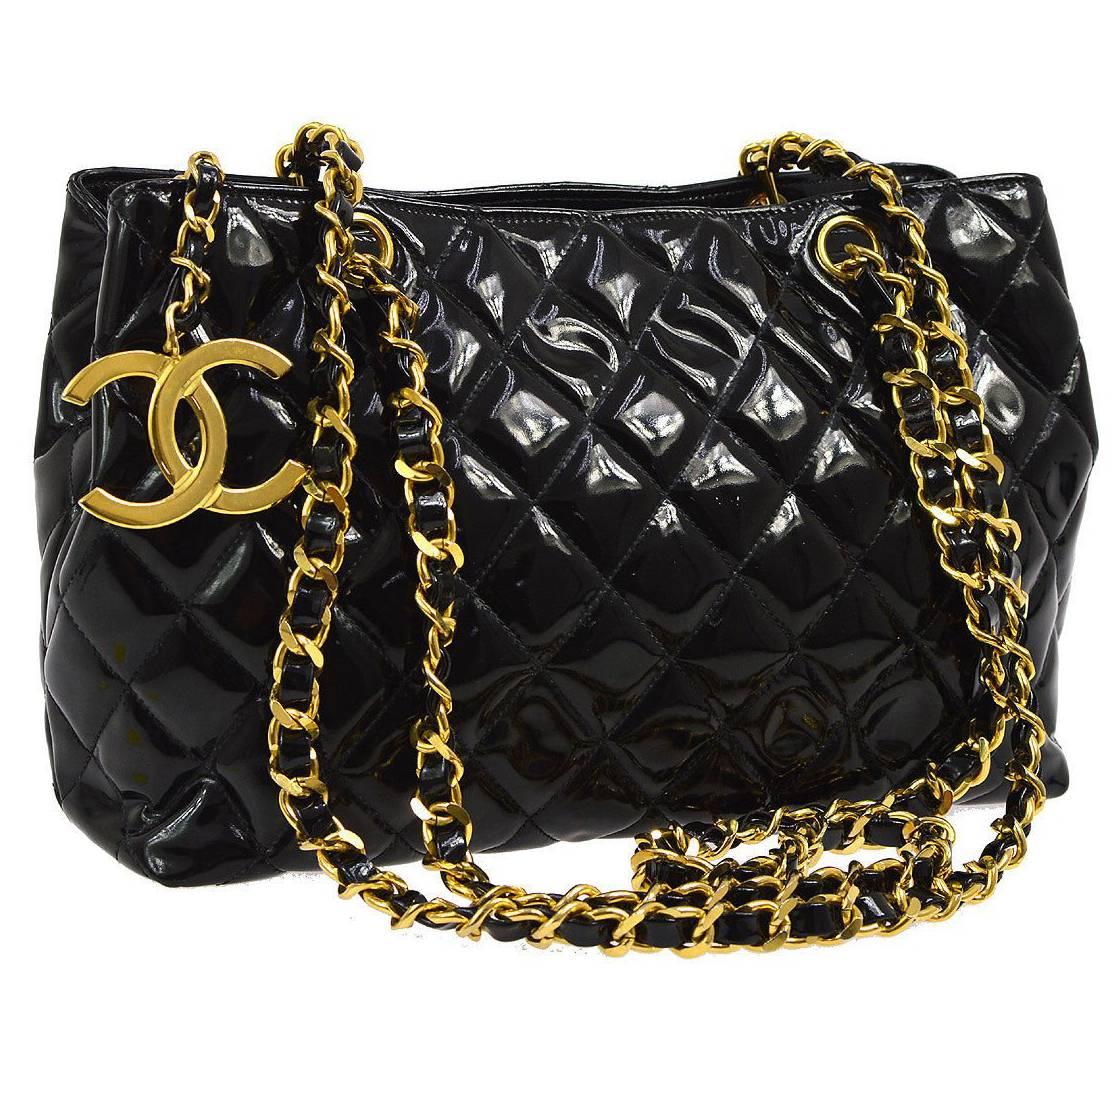 Chanel Black Quilted Patent Leather Gold Charm Carryall Evening Shoulder Bag